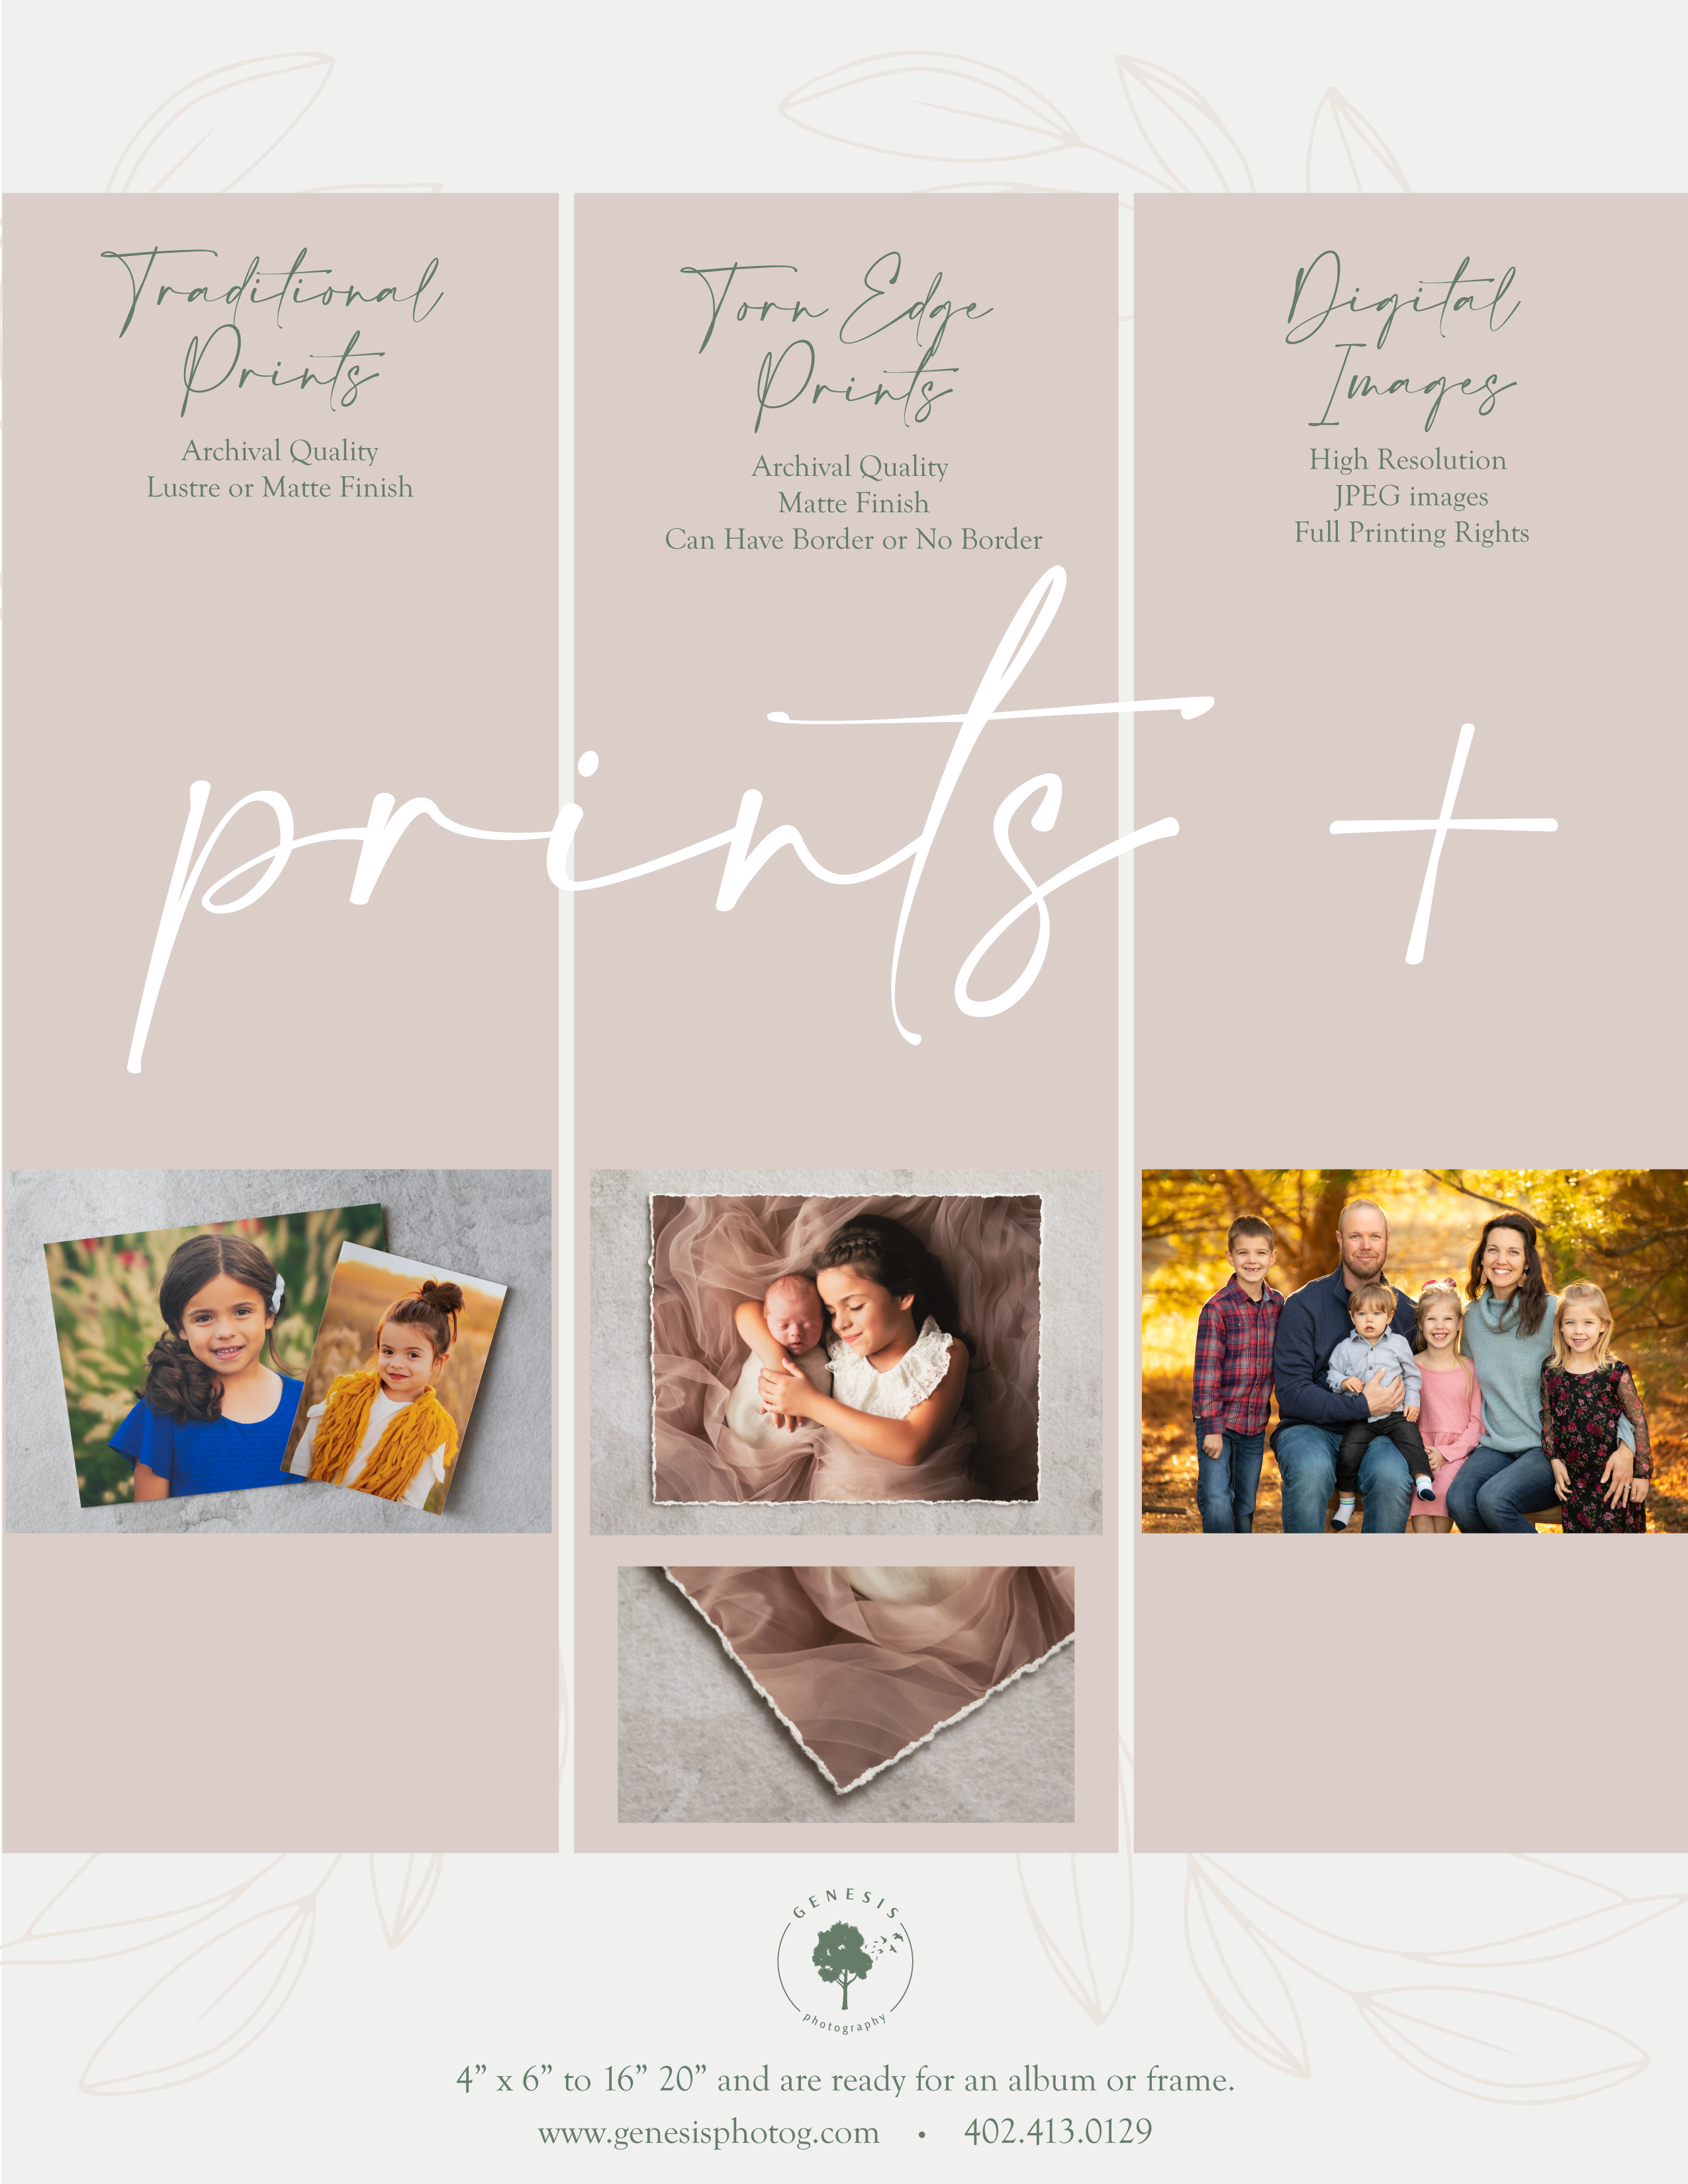 Product Guide for the Prints you can buy from Genesis Photography.